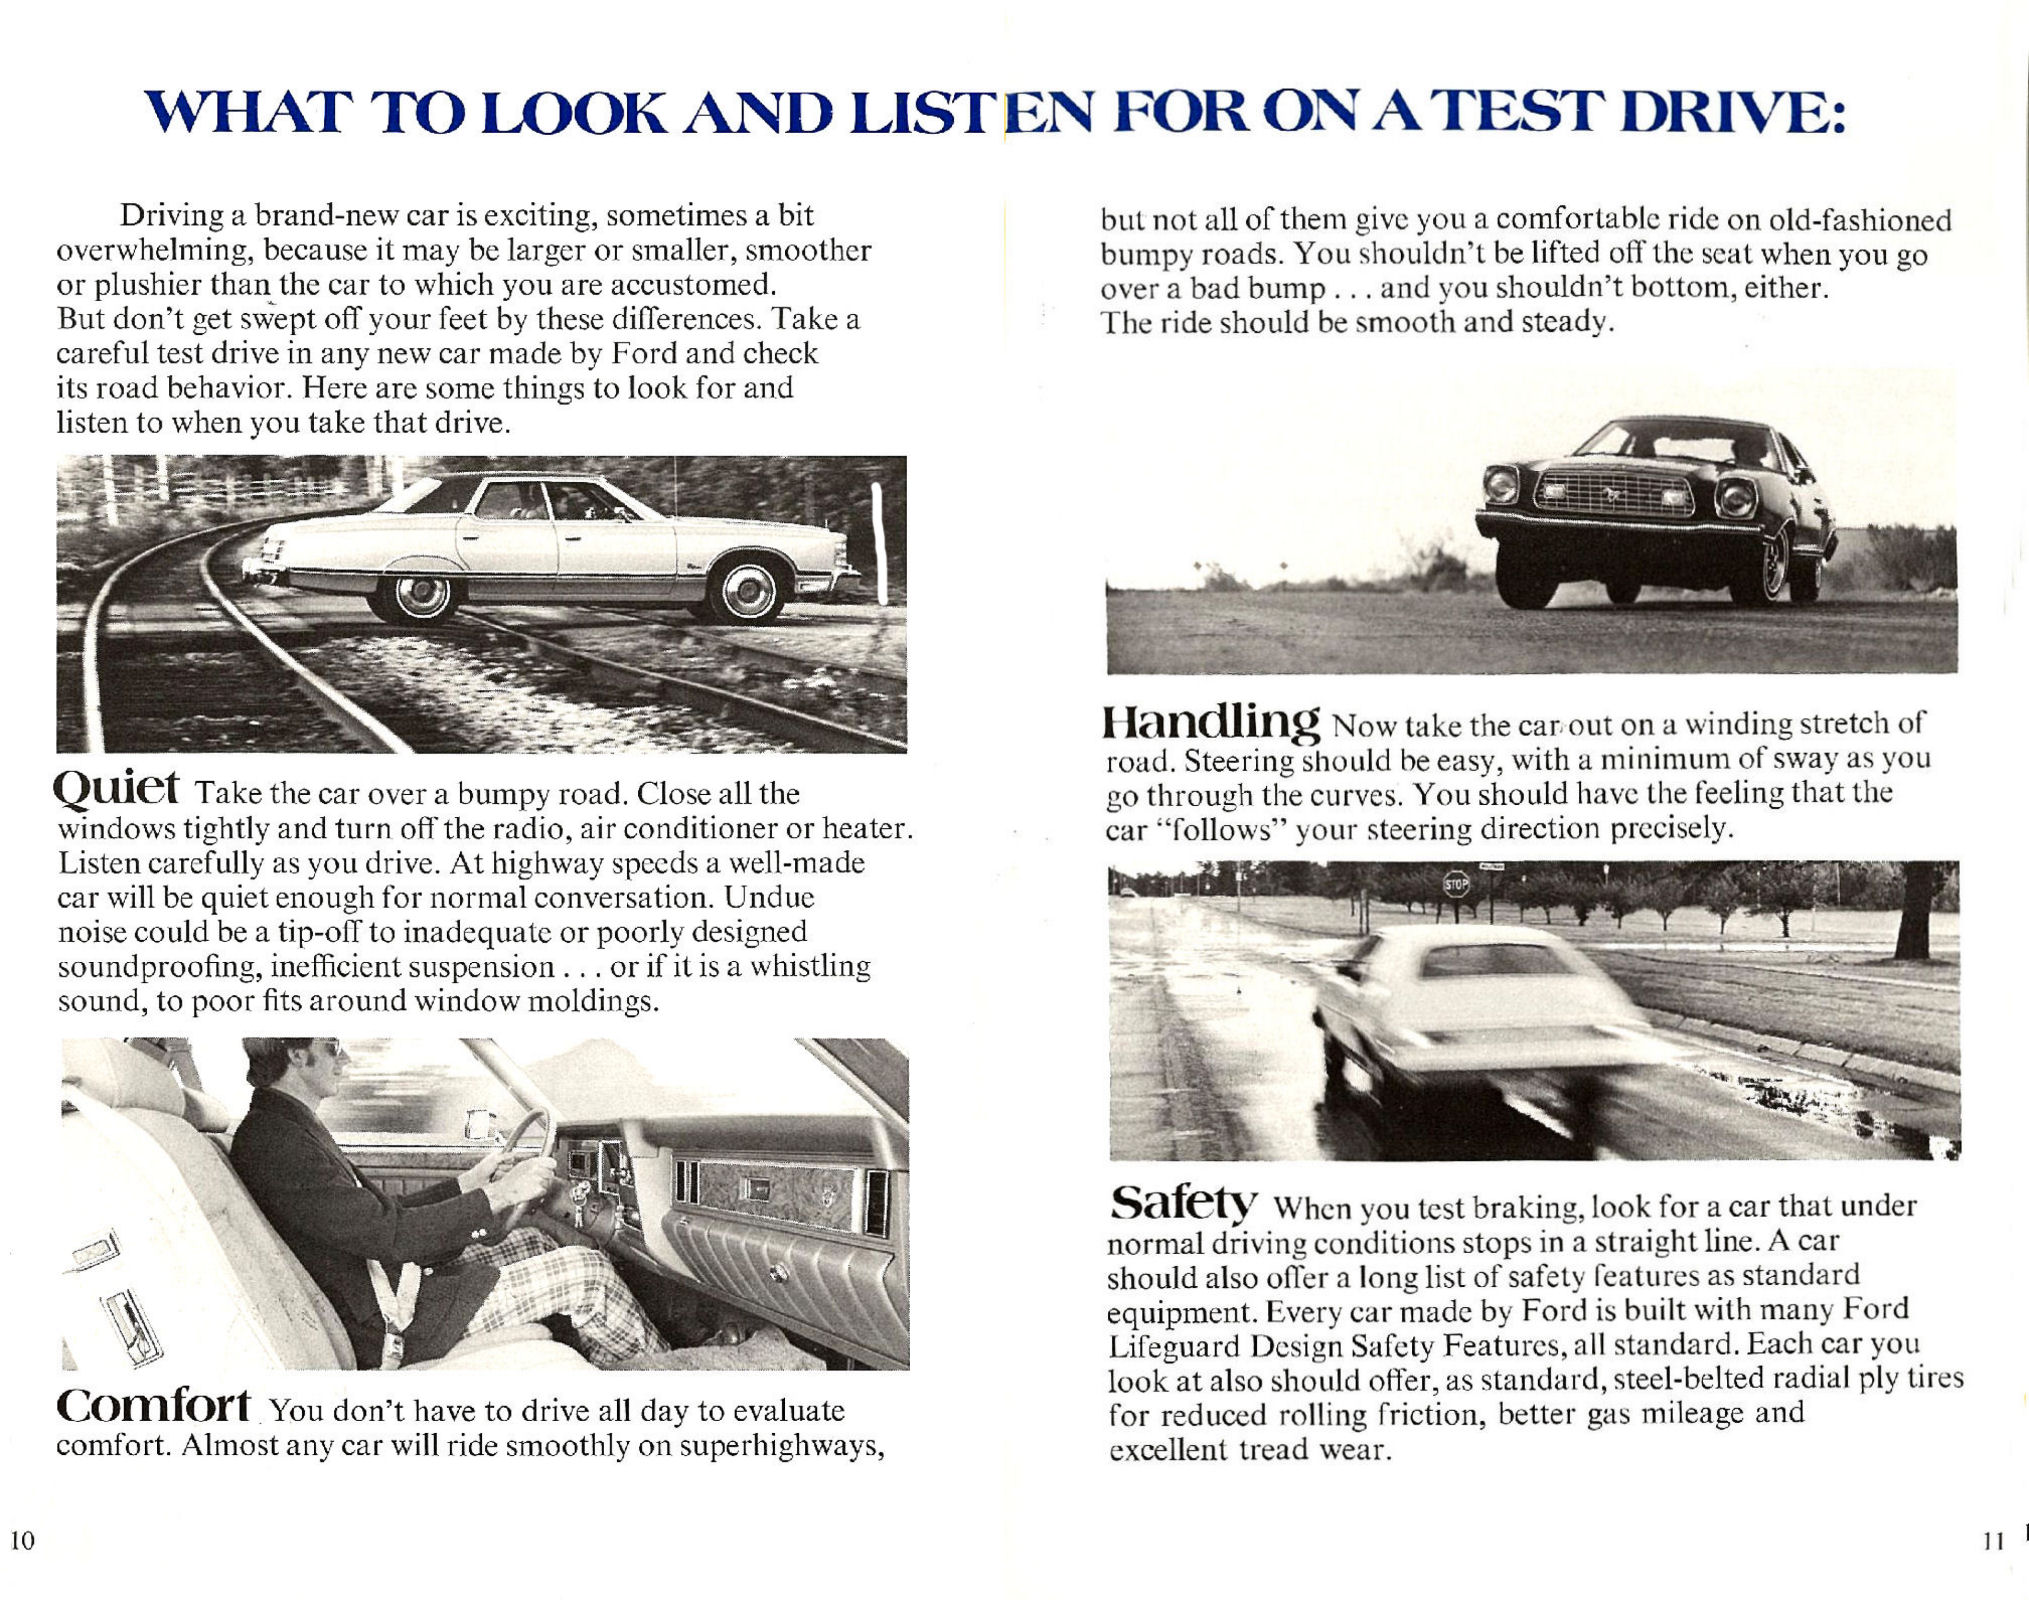 1975 Ford Closer Look Book-10-11